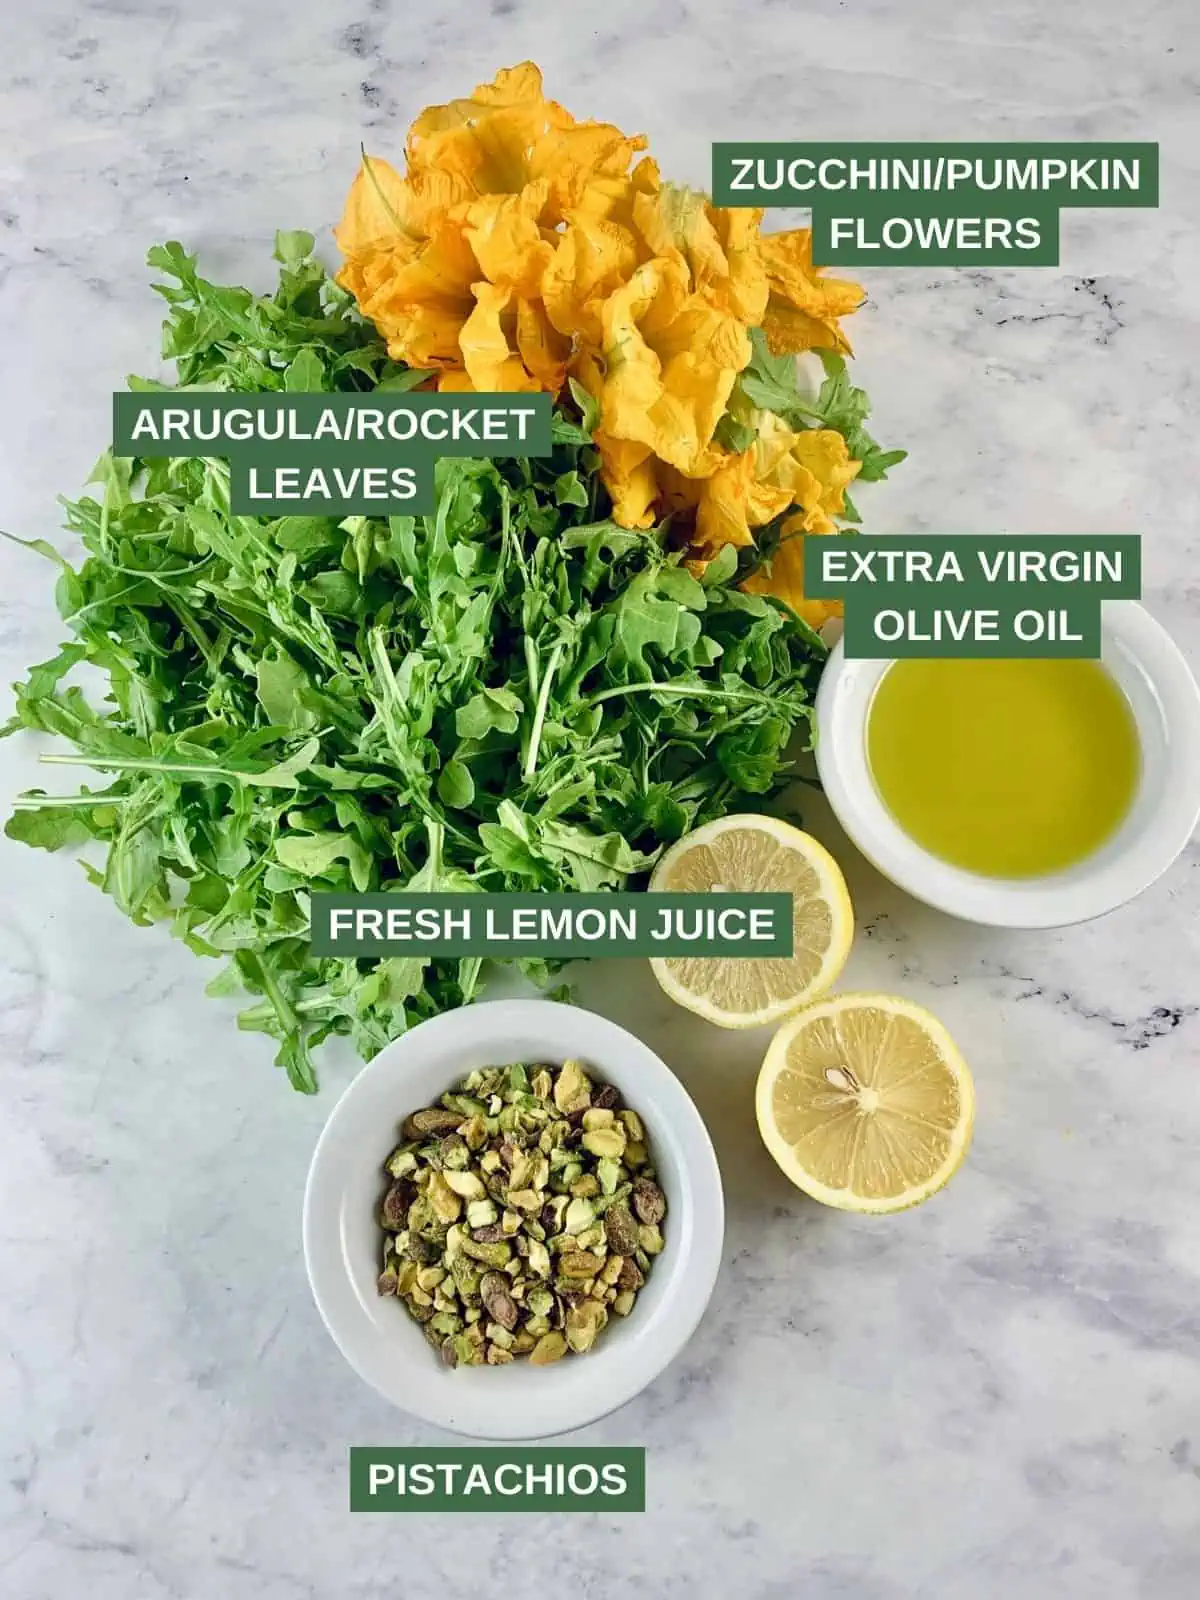 Labelled ingredients needed to make an arugula salad recipe with squash flowers.